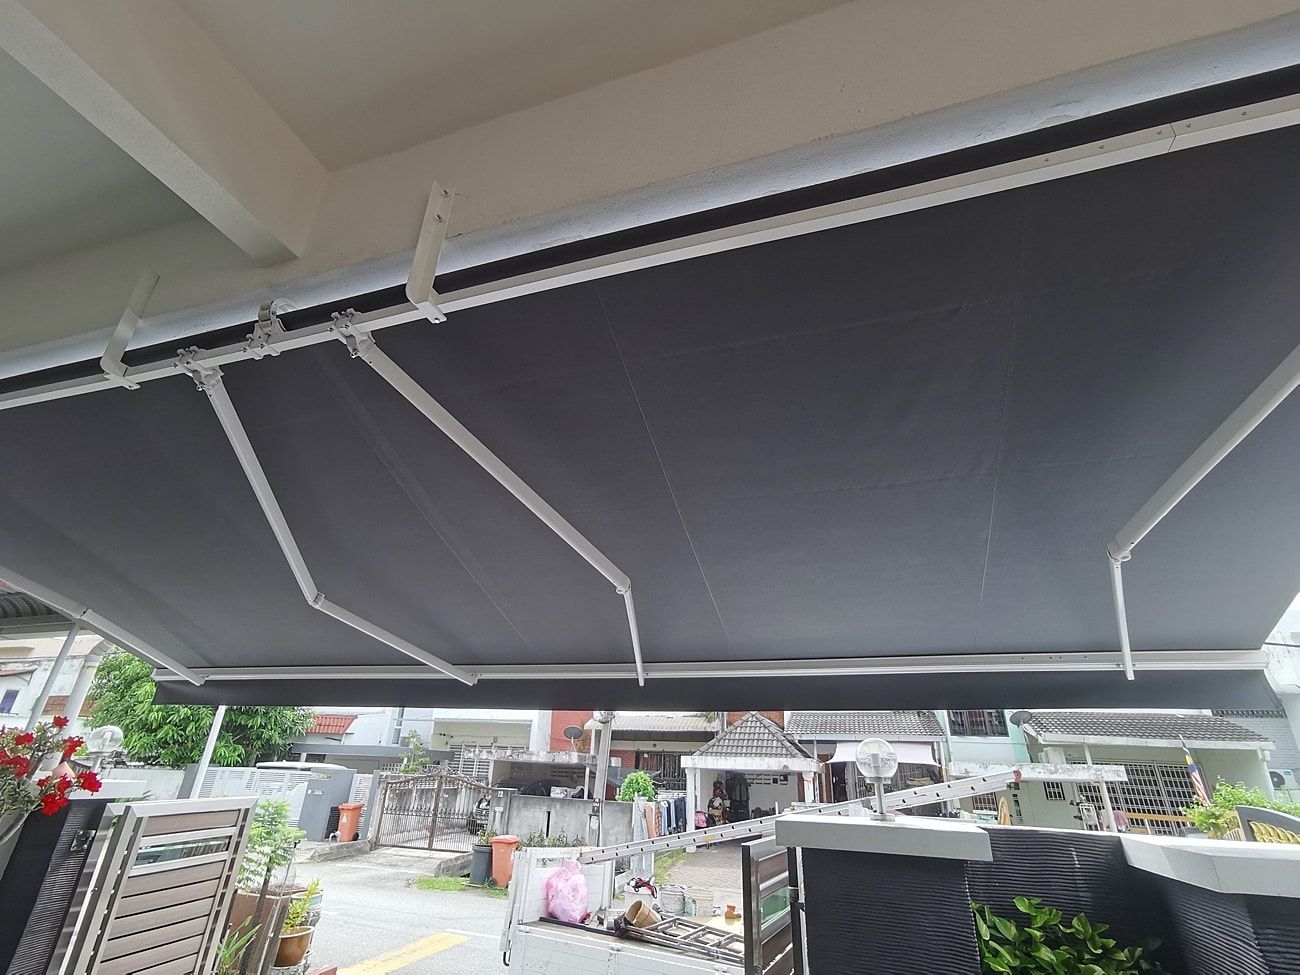 Tips to Extend the Life of Your Sunshade Fabric Awning